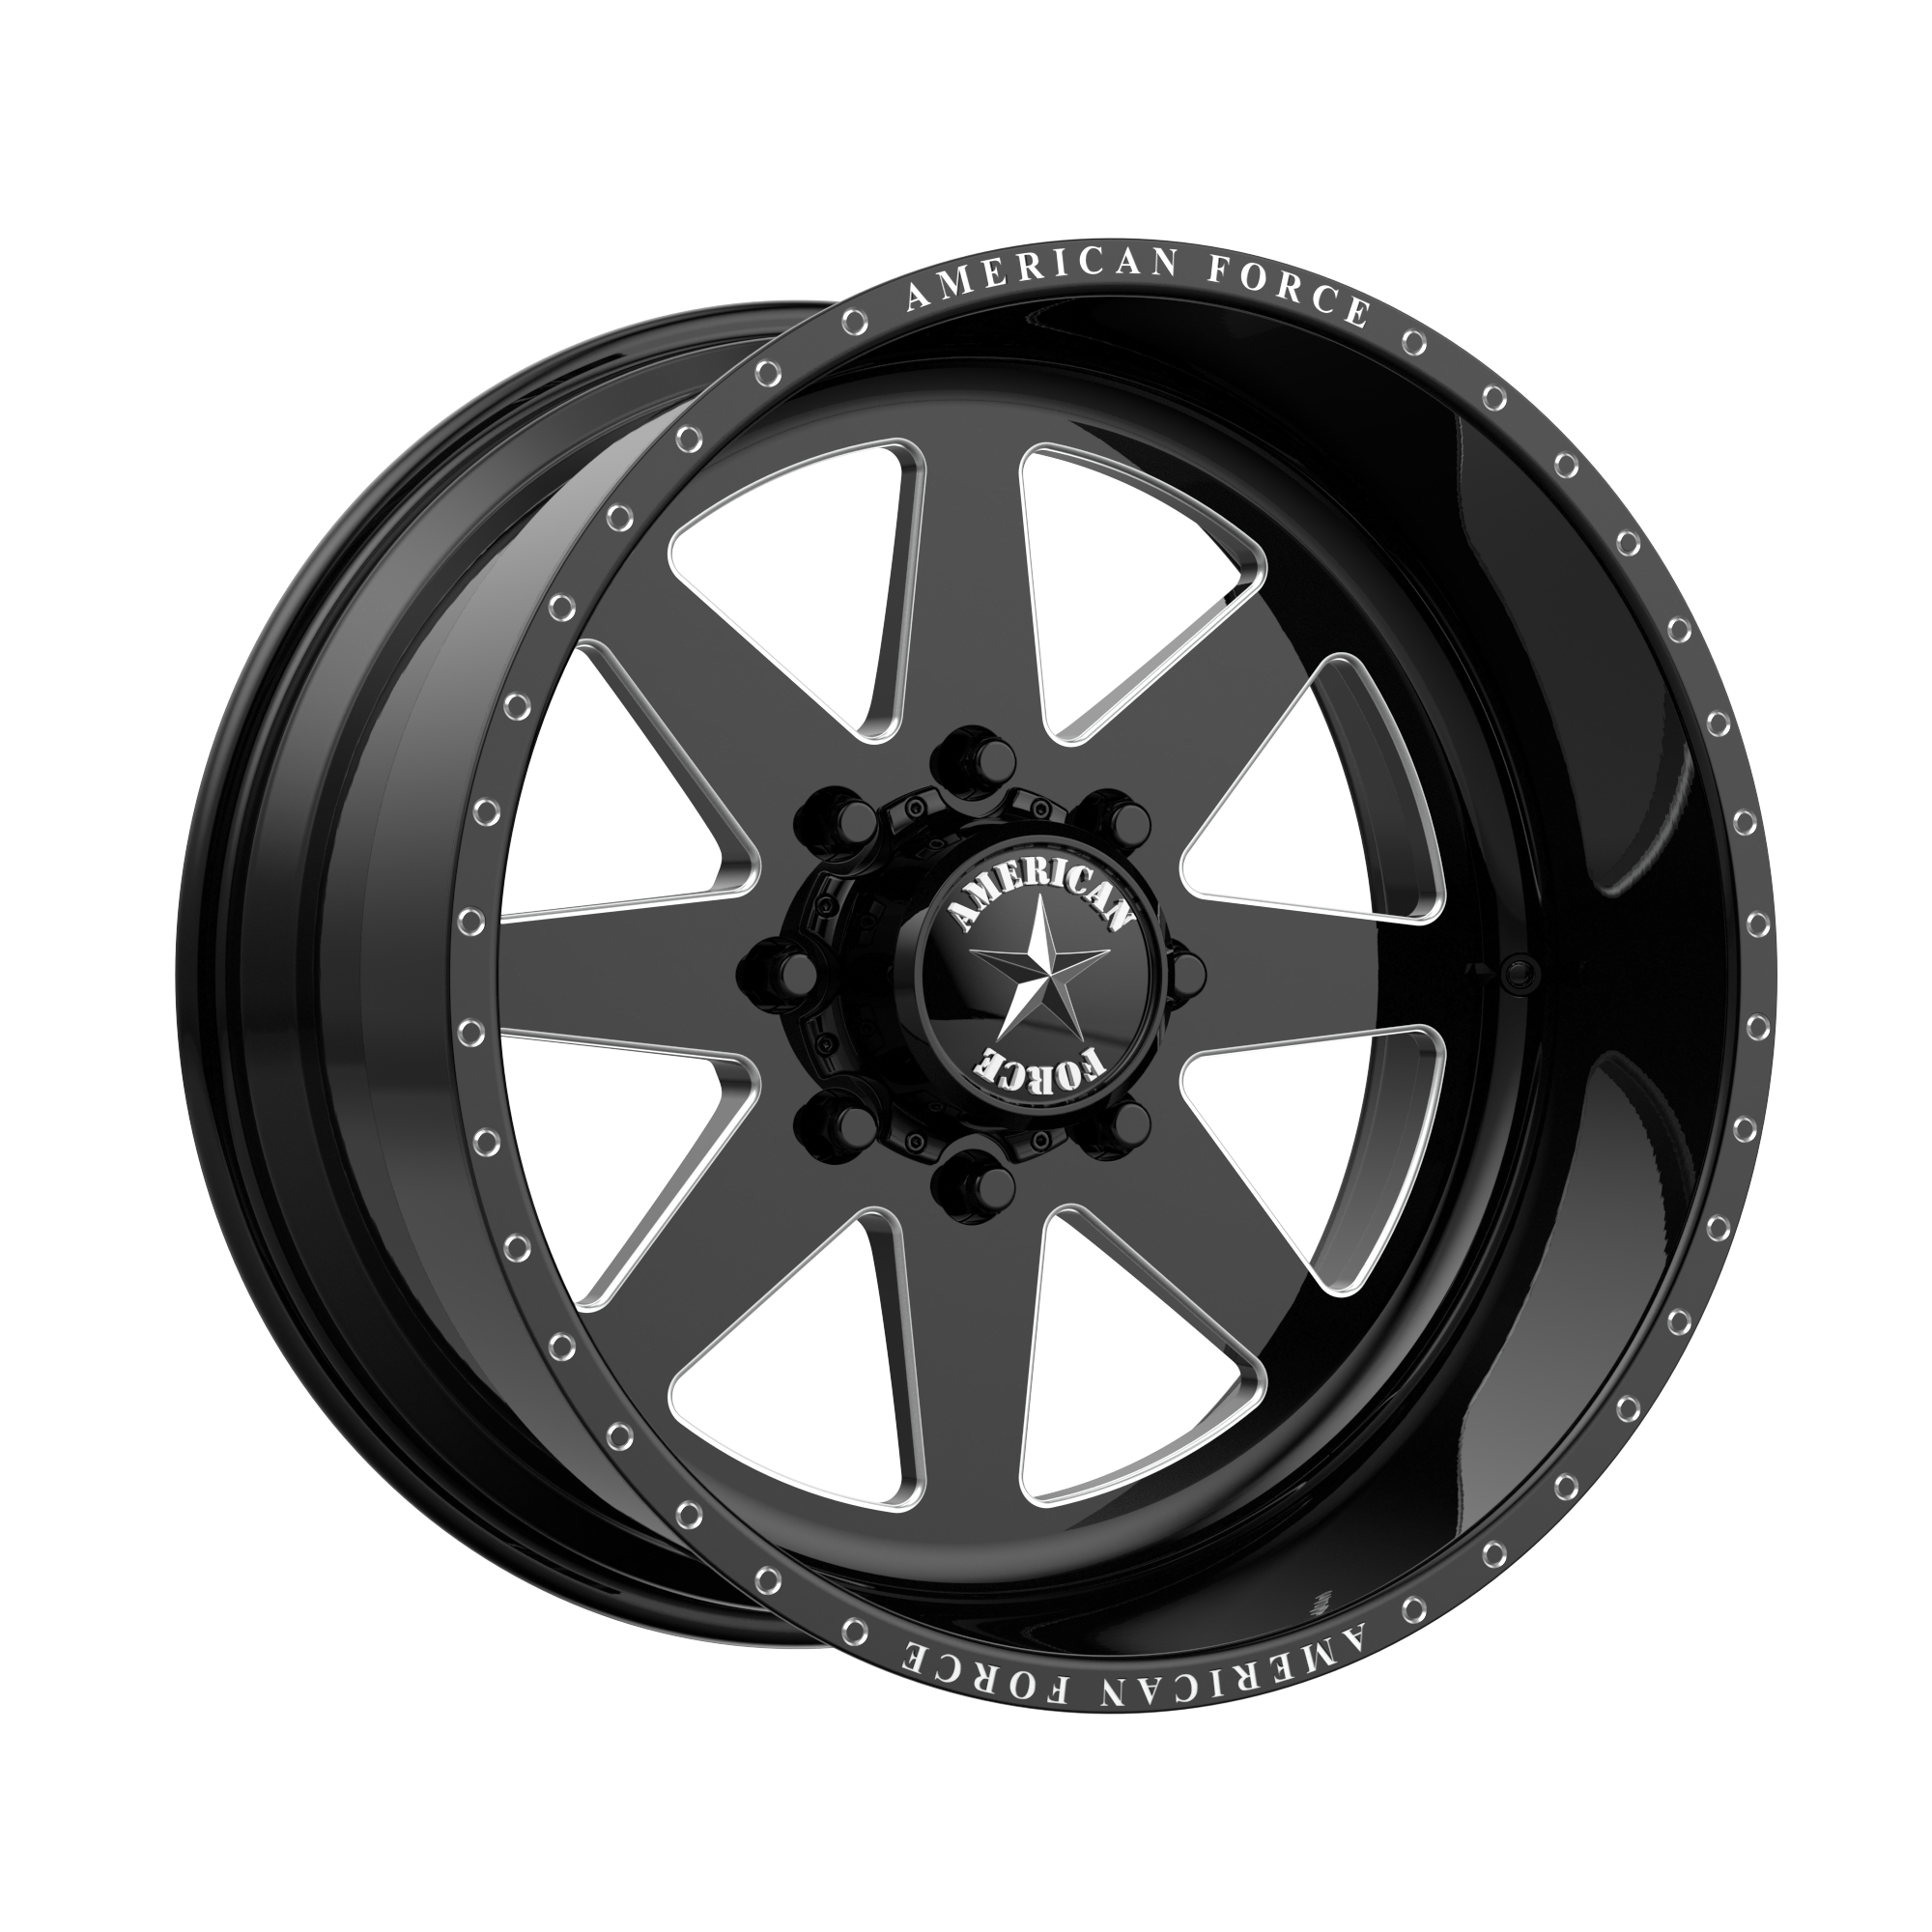 INDEPENDENCE SS 20x14 6x139.70 GLOSS BLACK MACHINED (-73 mm) - Tires and Engine Performance